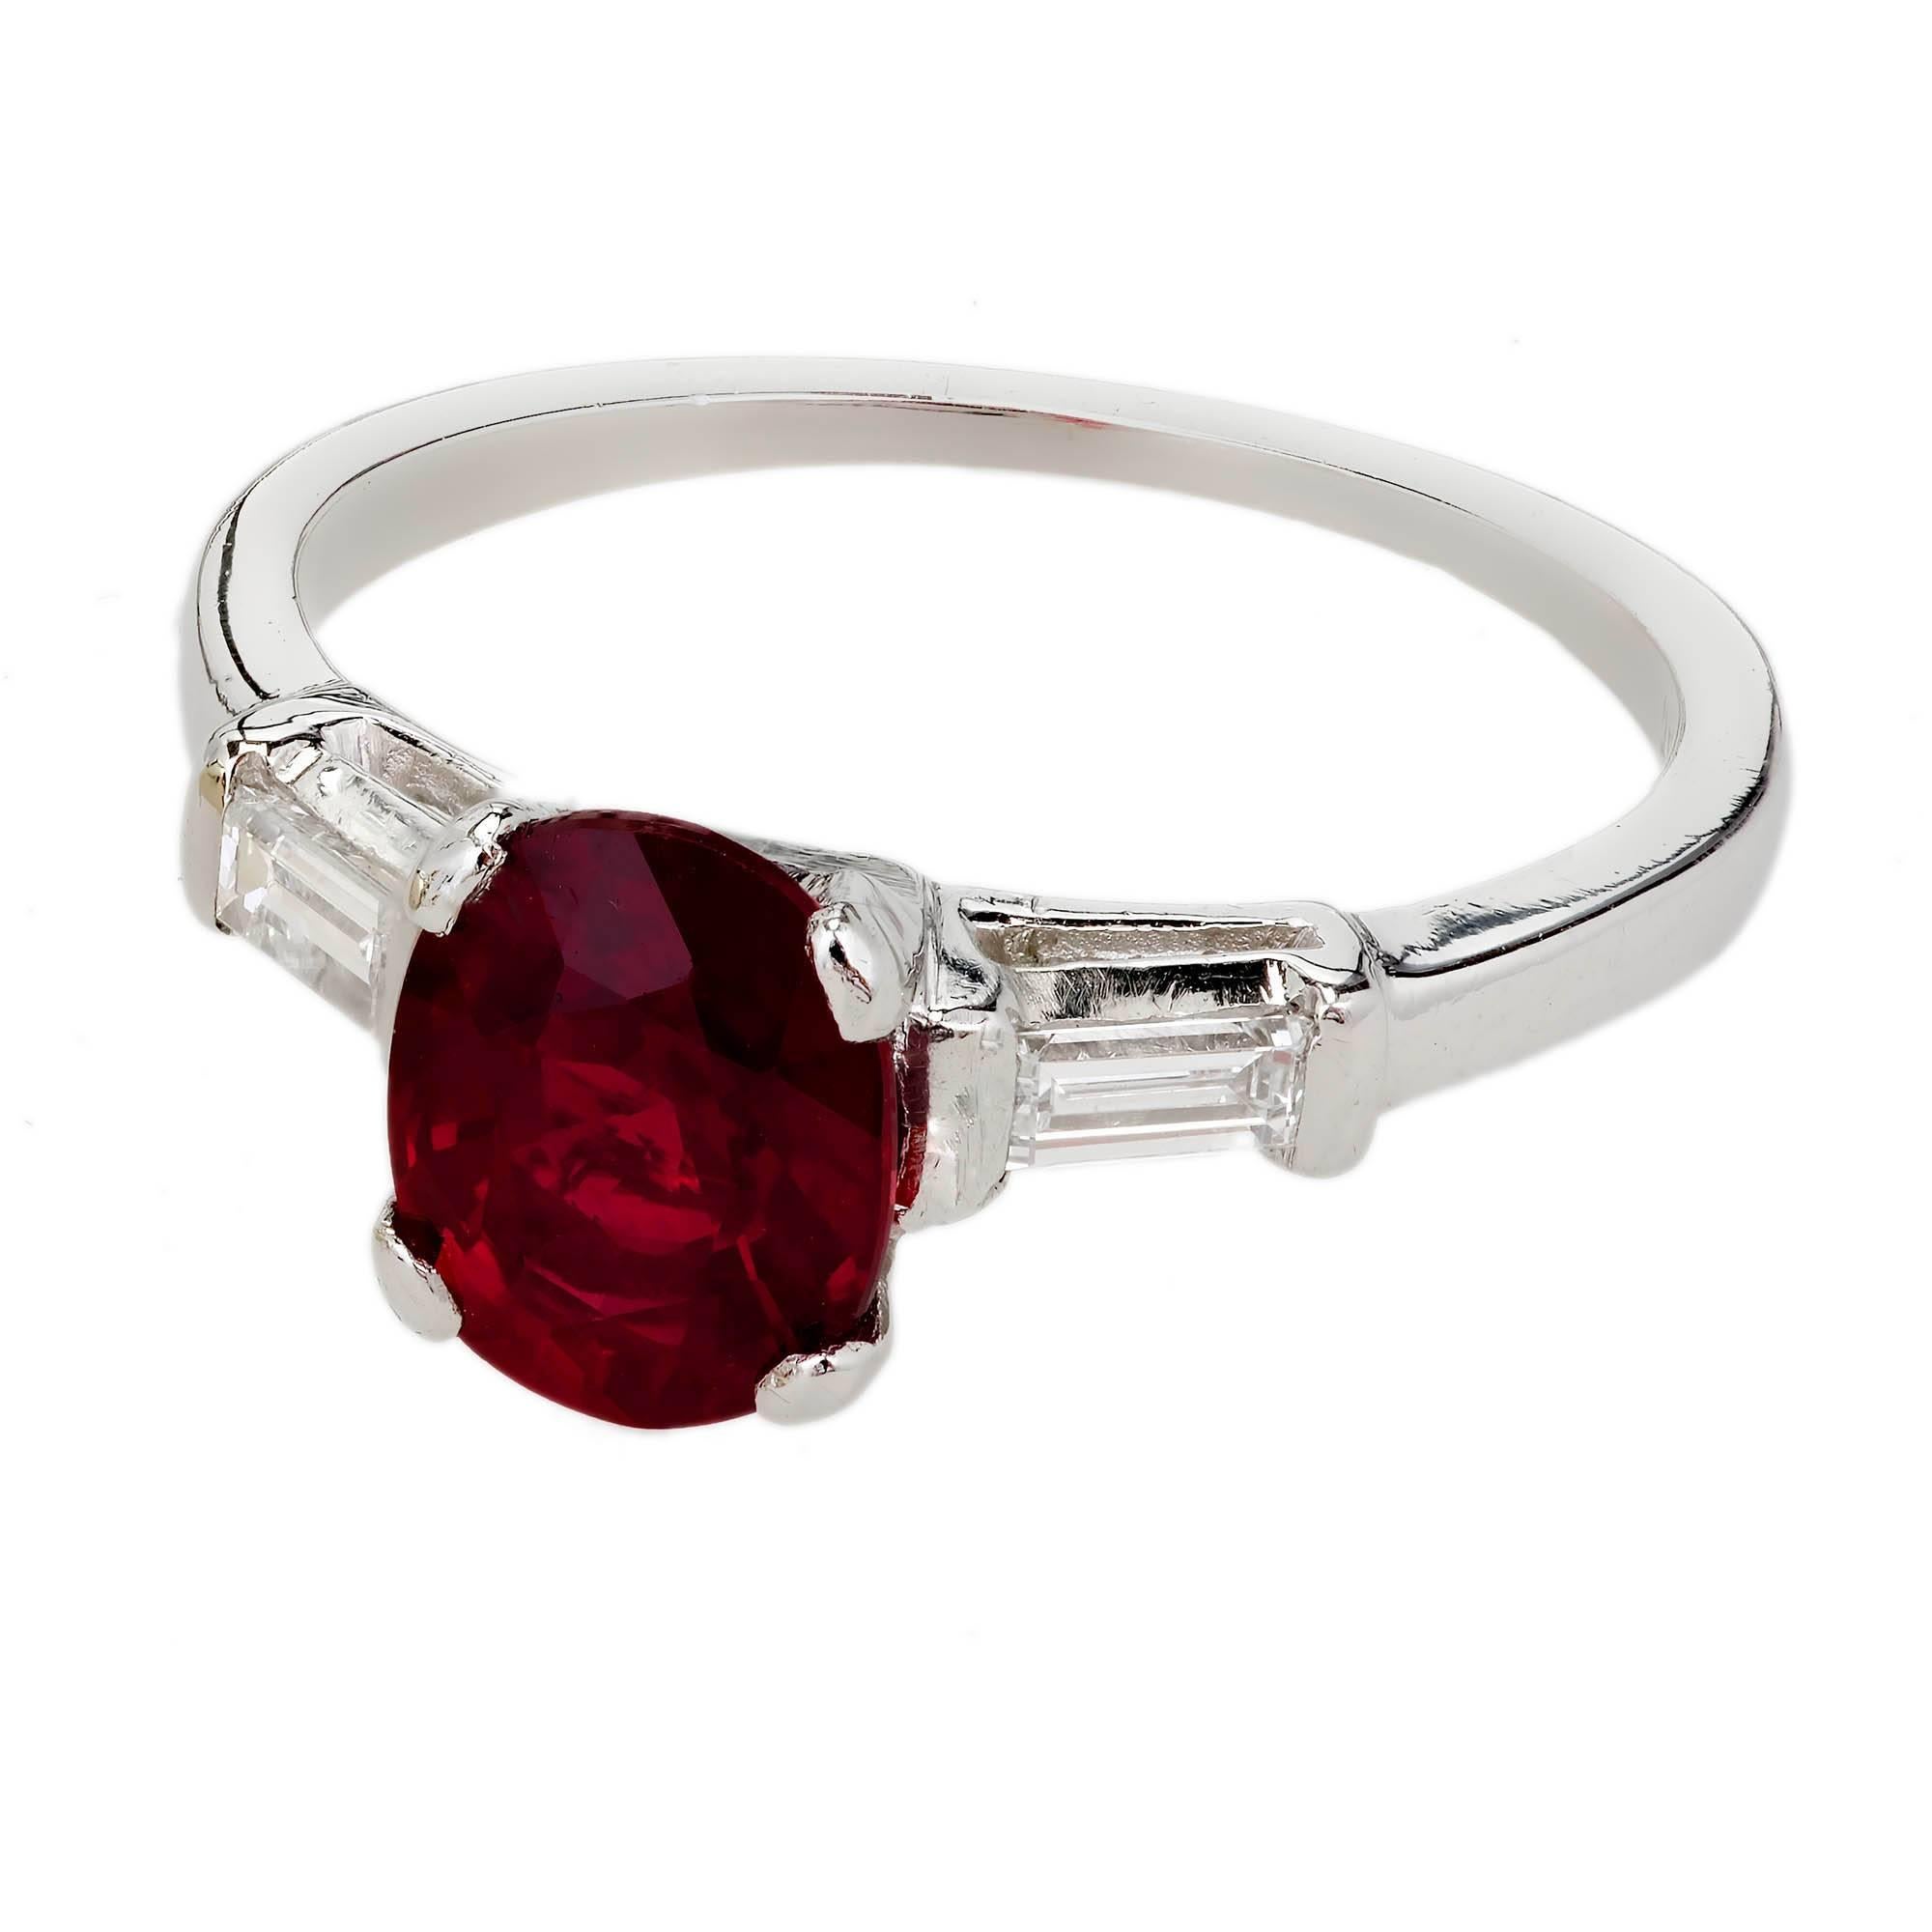 Vintage 1950’s red oval Ruby engagement ring with straight baguette accent Diamonds. GIA certified natural corundum Ruby. Heated with minor residue only.

1 oval bright red Ruby, approx. total weight 1.63cts, SI1, 7.63 x 6.07 x 4.01mm, heated minor